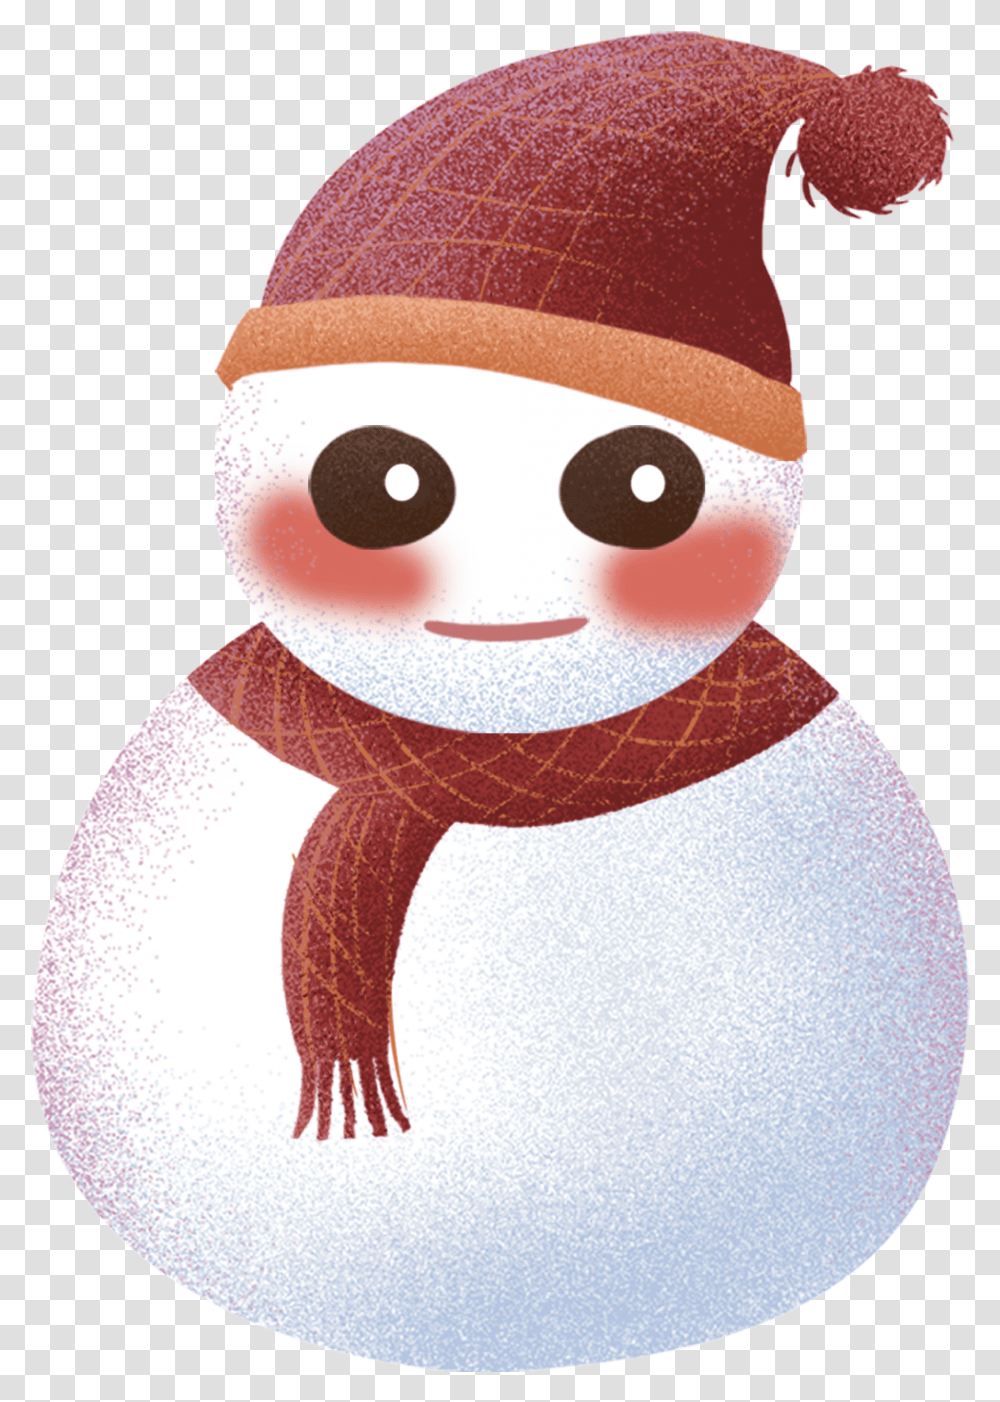 Cartoon Hand Drawn Illustration Big Eyes And Psd Snowman, Doll, Toy, Winter, Outdoors Transparent Png